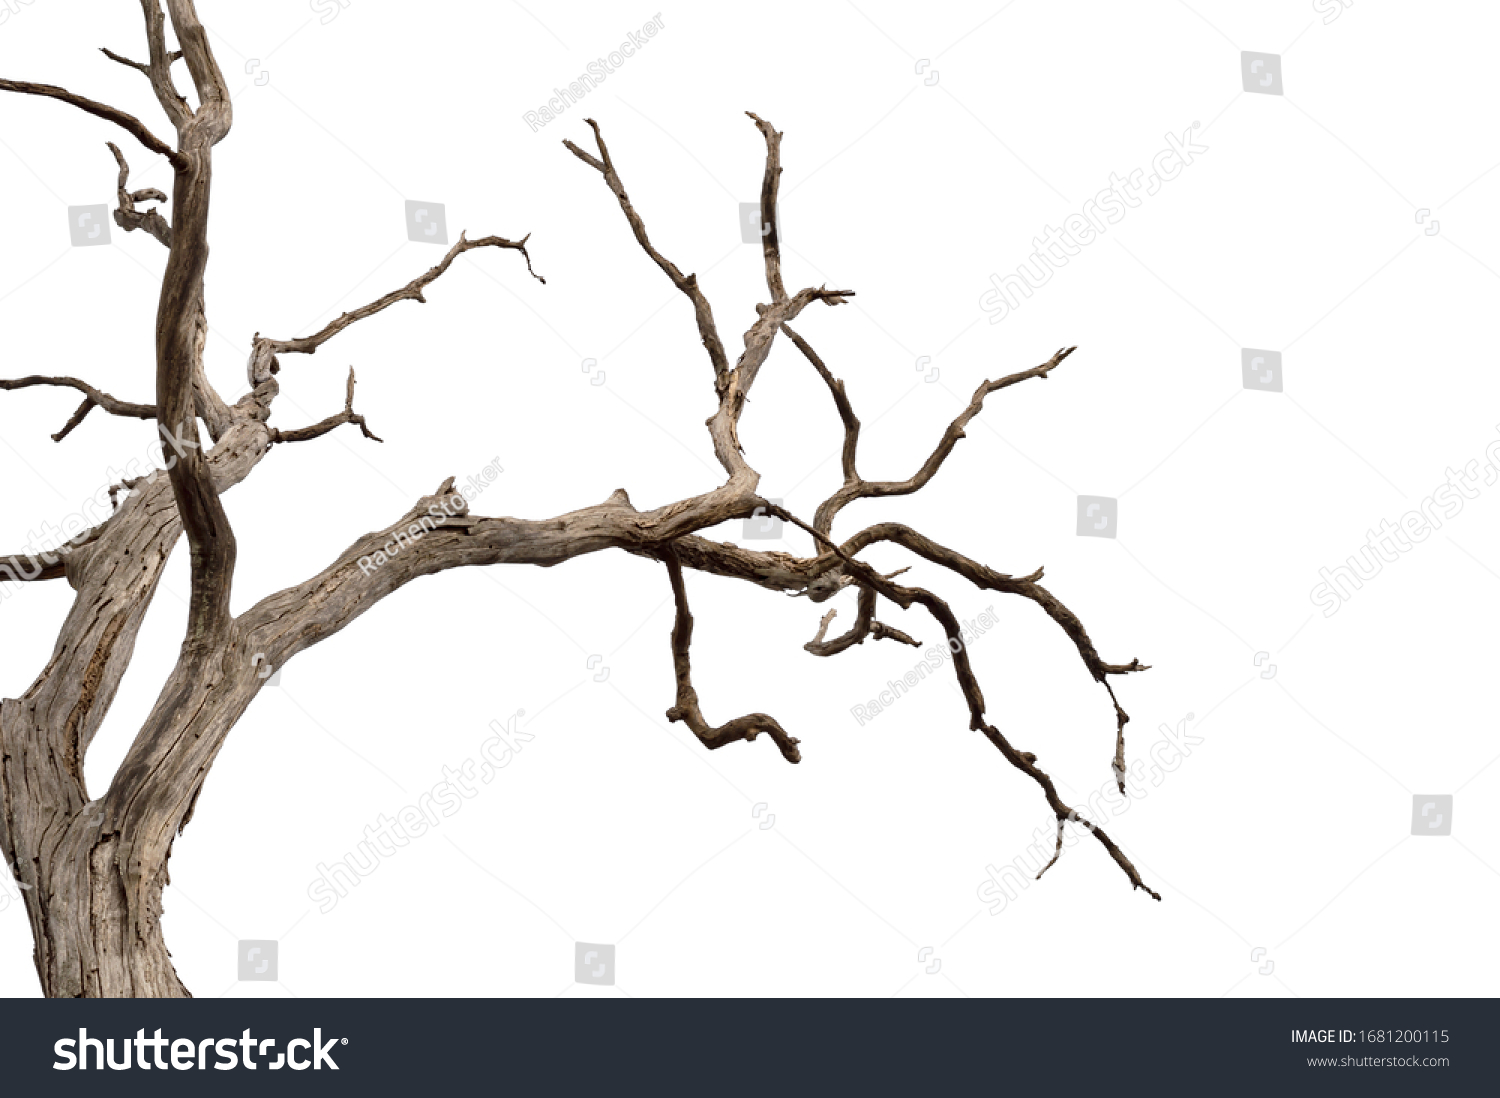 Dry branch of dead tree with cracked dark bark.beautiful dry branch of tree isolated on white background.Single old and dead tree.Dry wooden stick from the forest isolated on white background . #1681200115